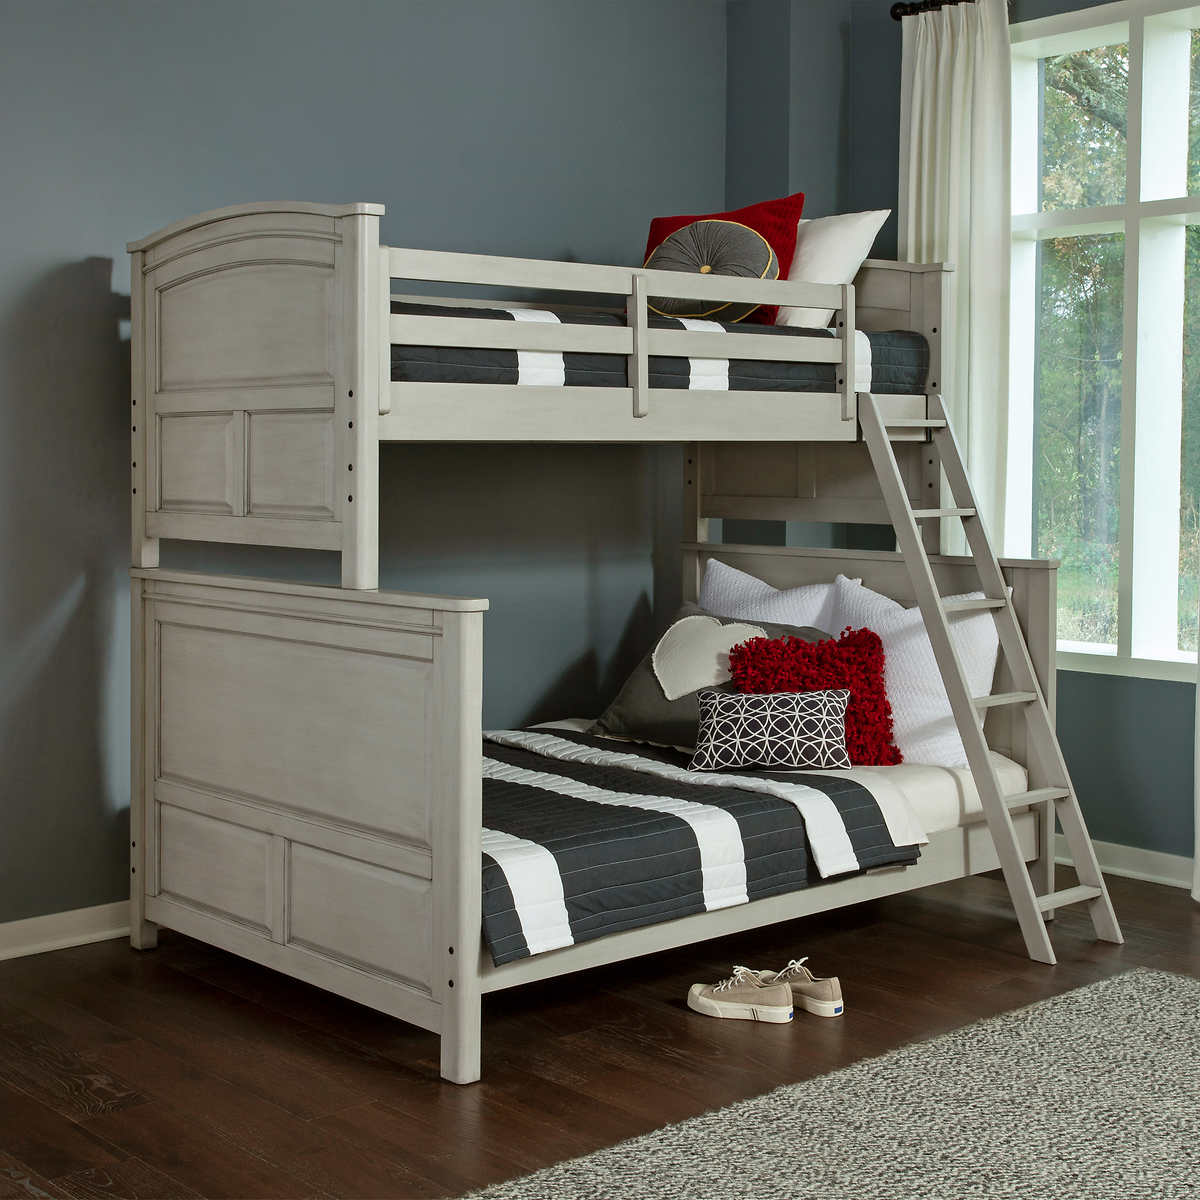 Wingate Twin Over Full Bunk Bed Costco, Park City Bunk Beds Reviews